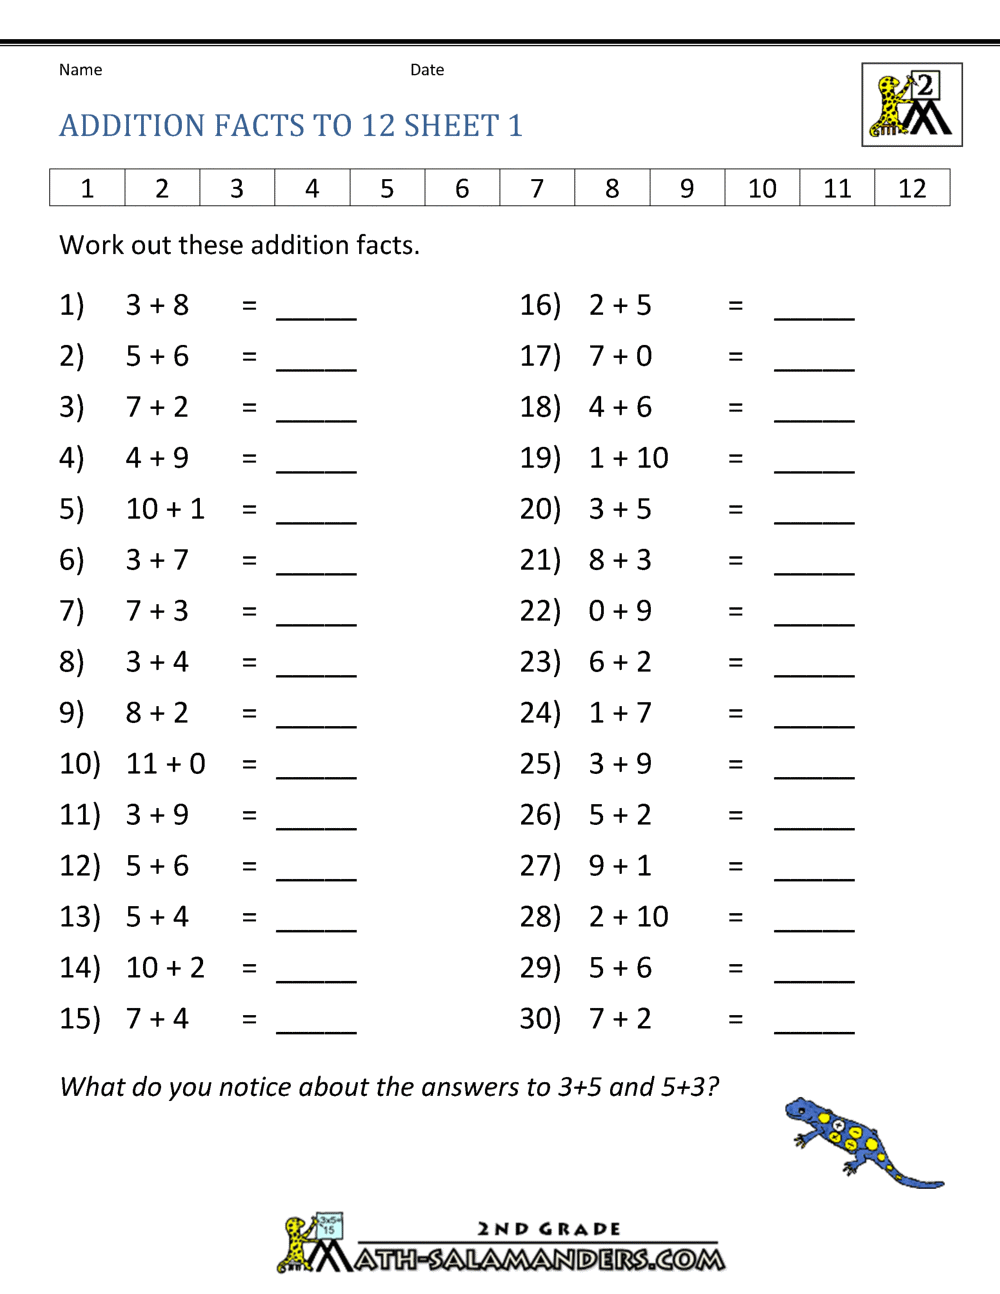 learning-addition-facts-to-12-12